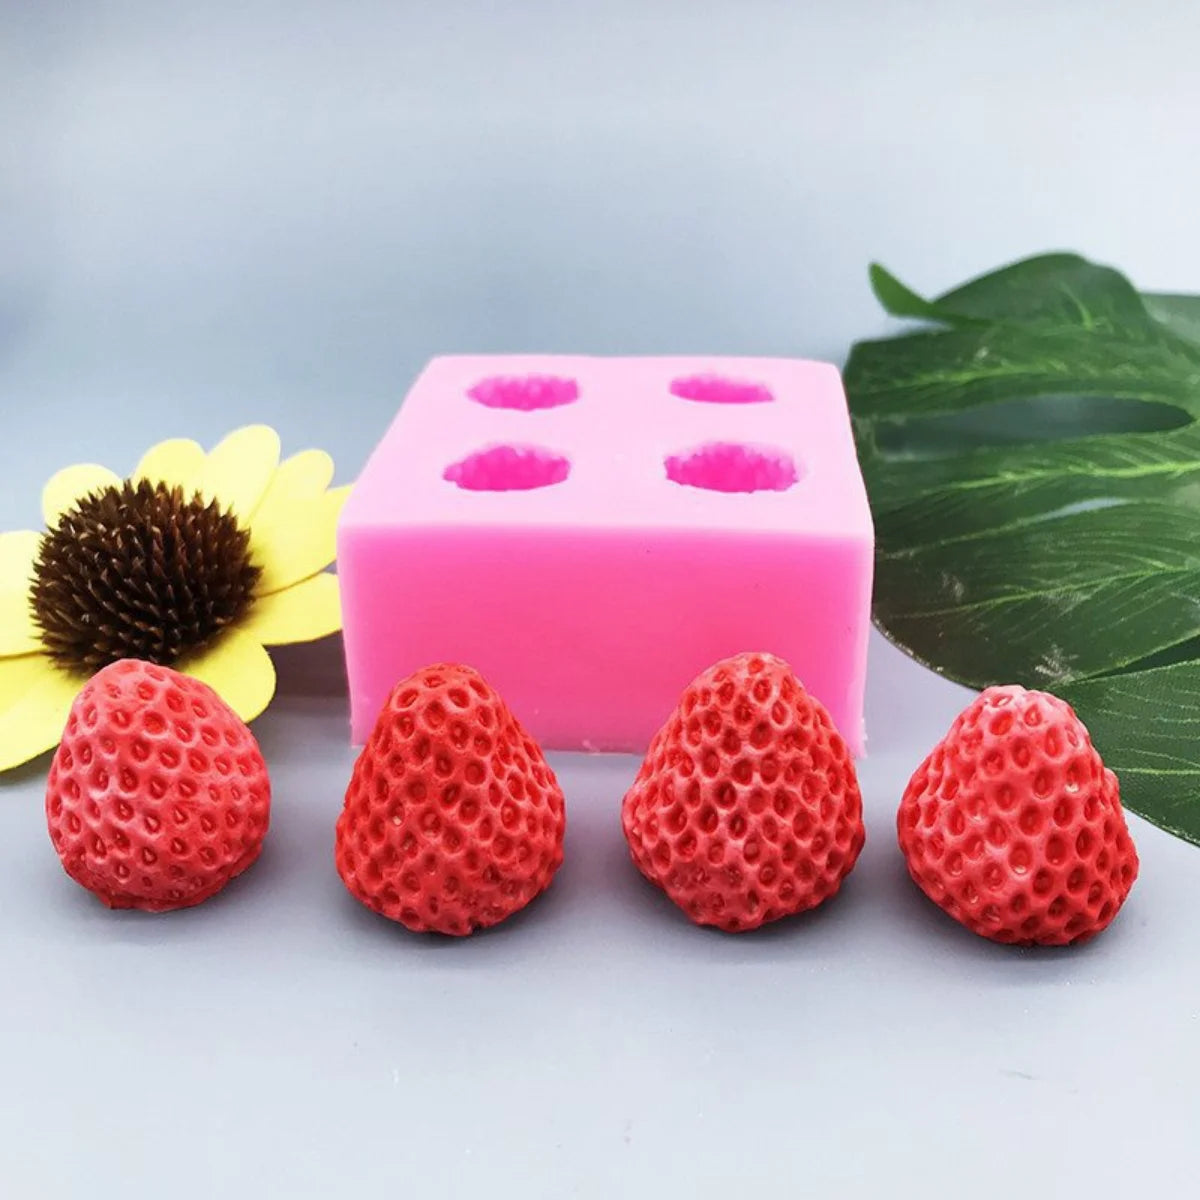 Strawberry Silicone Mould Fondant Cake Chocolate Jelly Candle Soap Making Mold